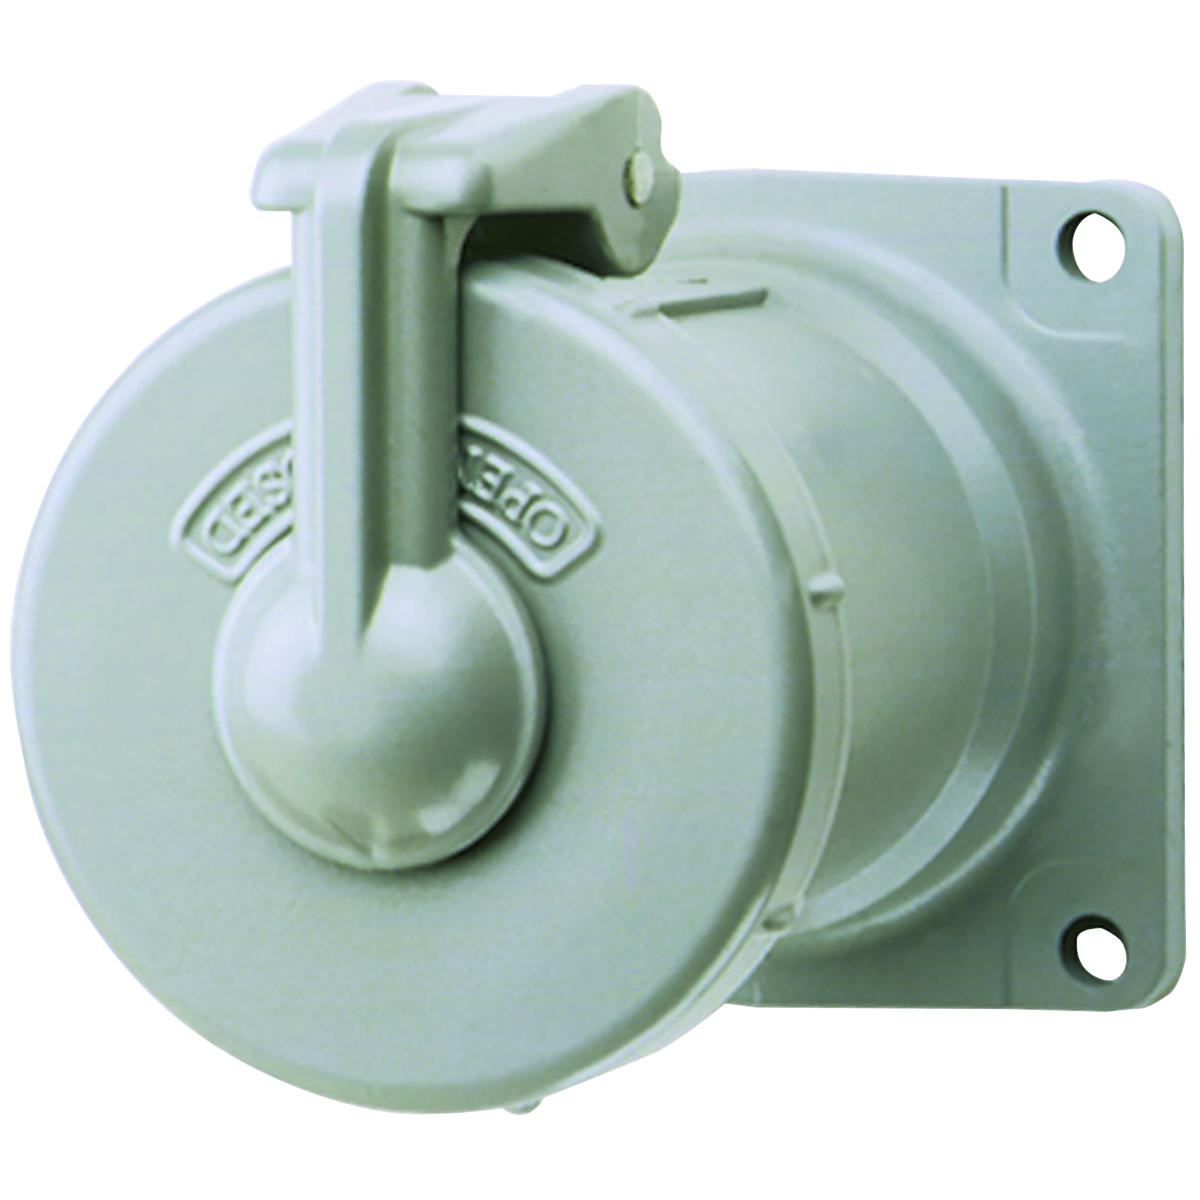 Versamate Series 100a 3 Pole 3 Wire Receptacle Assembly Vr1031 Killark